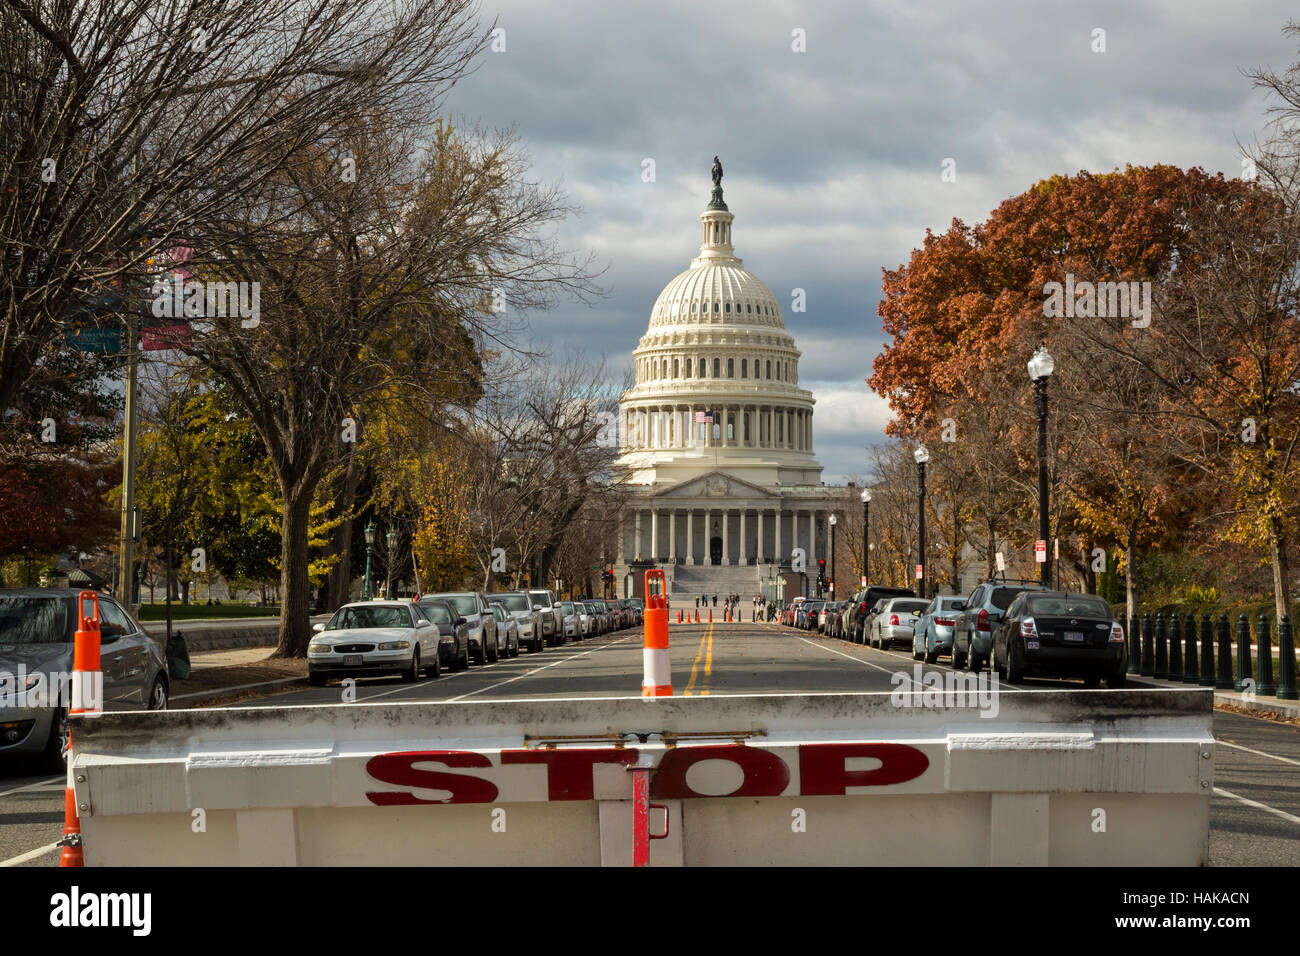 Washington, DC - A security barrier on East Capitol Street near the U.S. Capitol building. Stock Photo